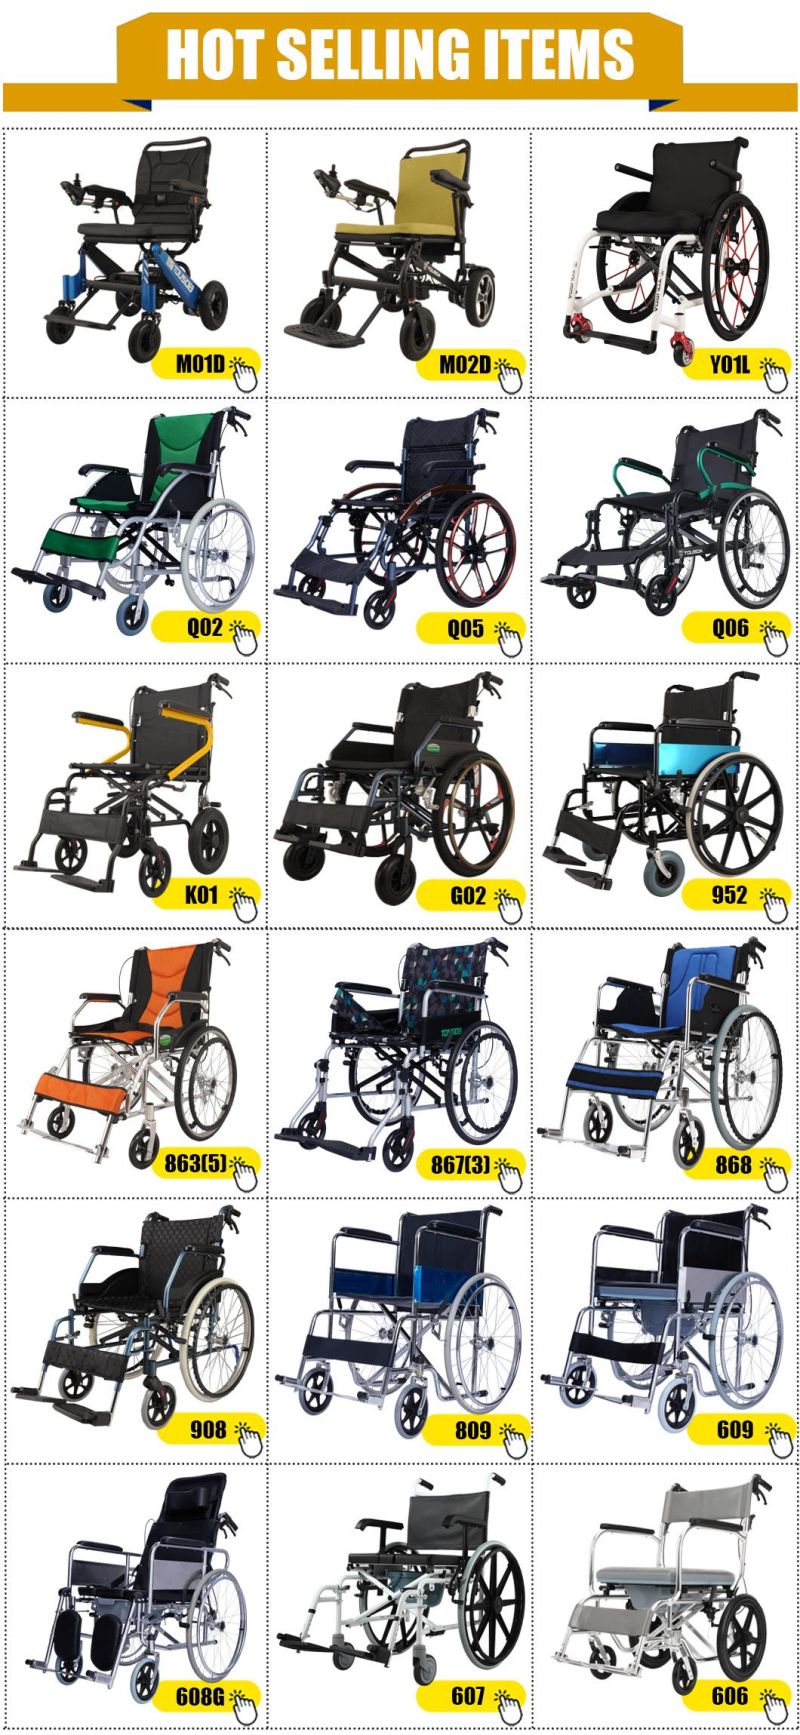 Rehabilitation Therapy Supplies 2021 New 4 X 4 Heavy Duty Lift up Power Wheelchair with Four Drive off Road